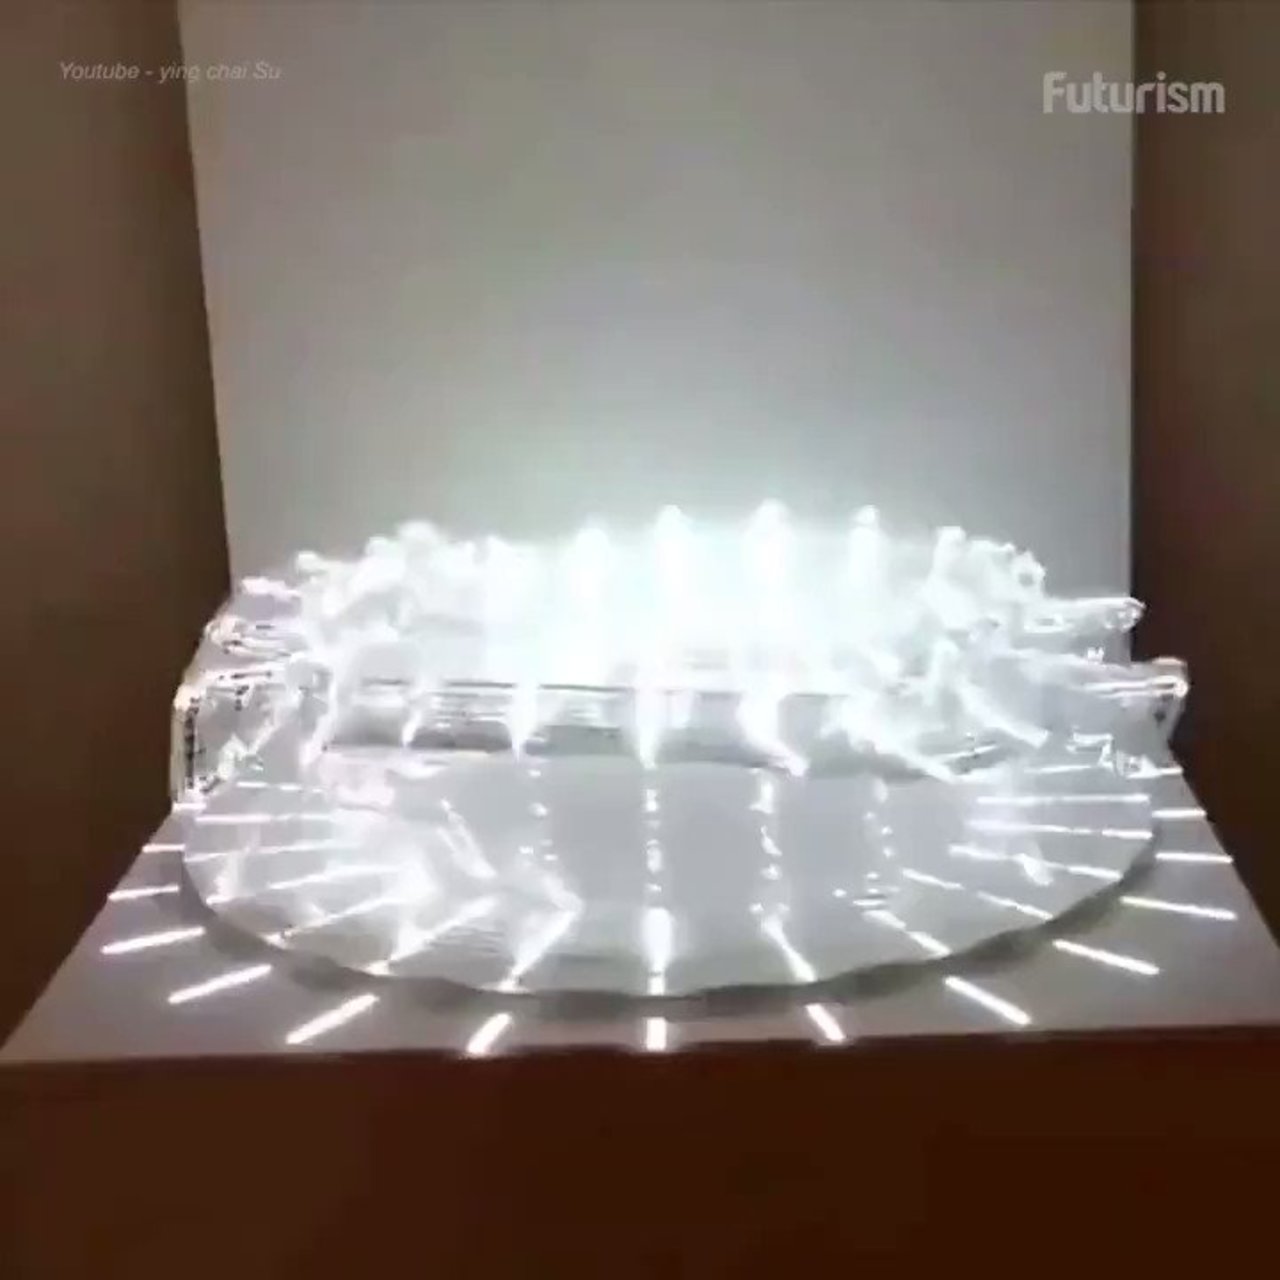 This 3d printed zeotrode creates the illusion of 3d motion by @futurism #Innovation #Digital #Tech #DataScience #AI #IoT #Finserv #Fintech Cc: @enricomolinari https://t.co/GJzi4ovKBw